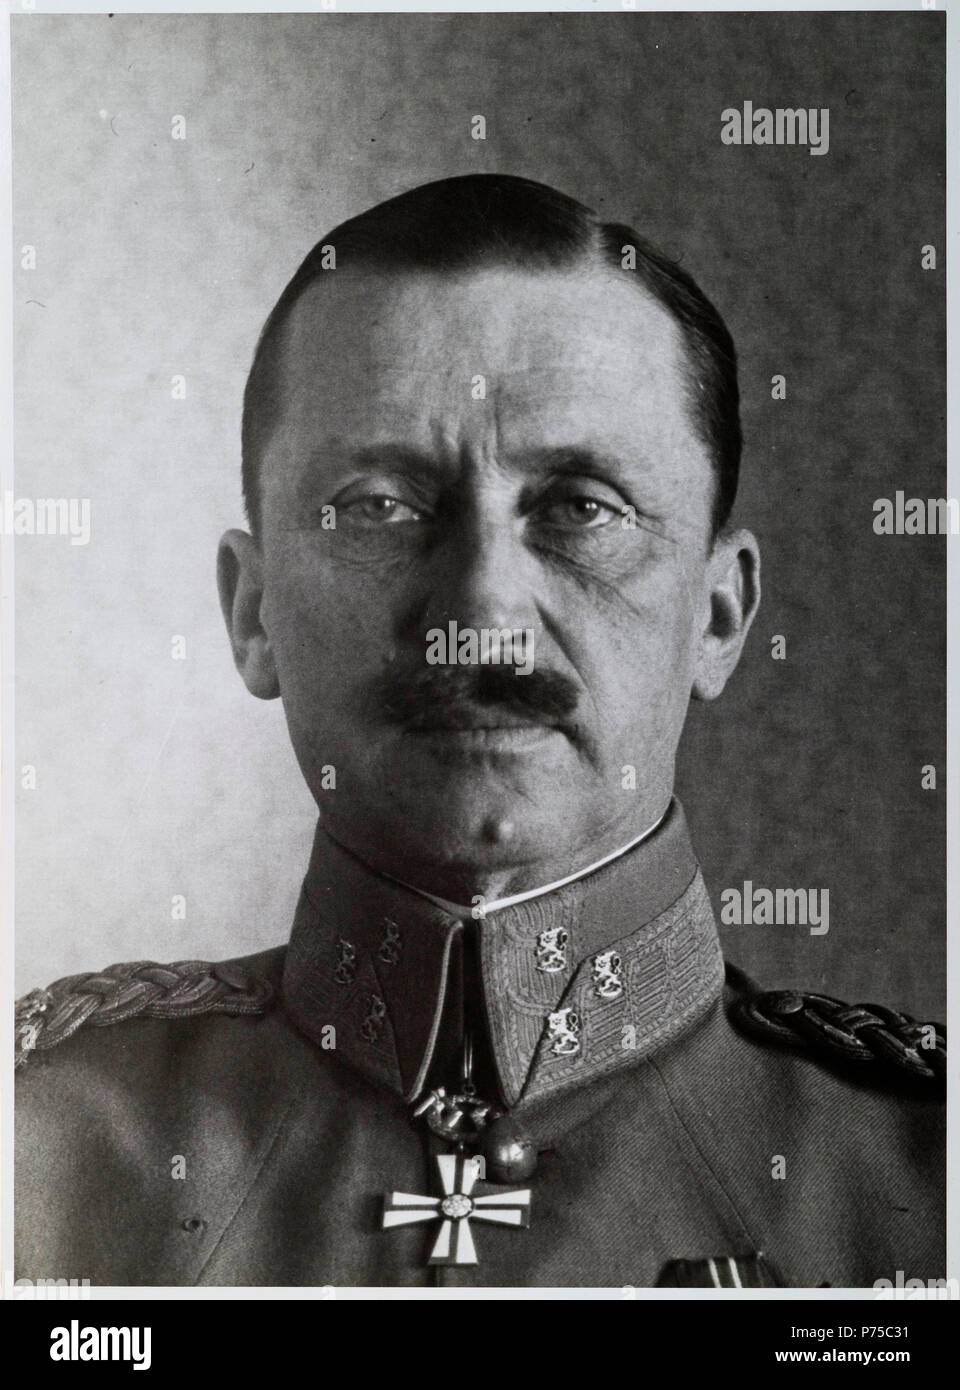 Portrait of Carl Gustaf Mannerheim, later used as reference by Akseli Gallen-Kallela when designing a medal, leader of the Whites in the Finnish Civil War, Stock Photo